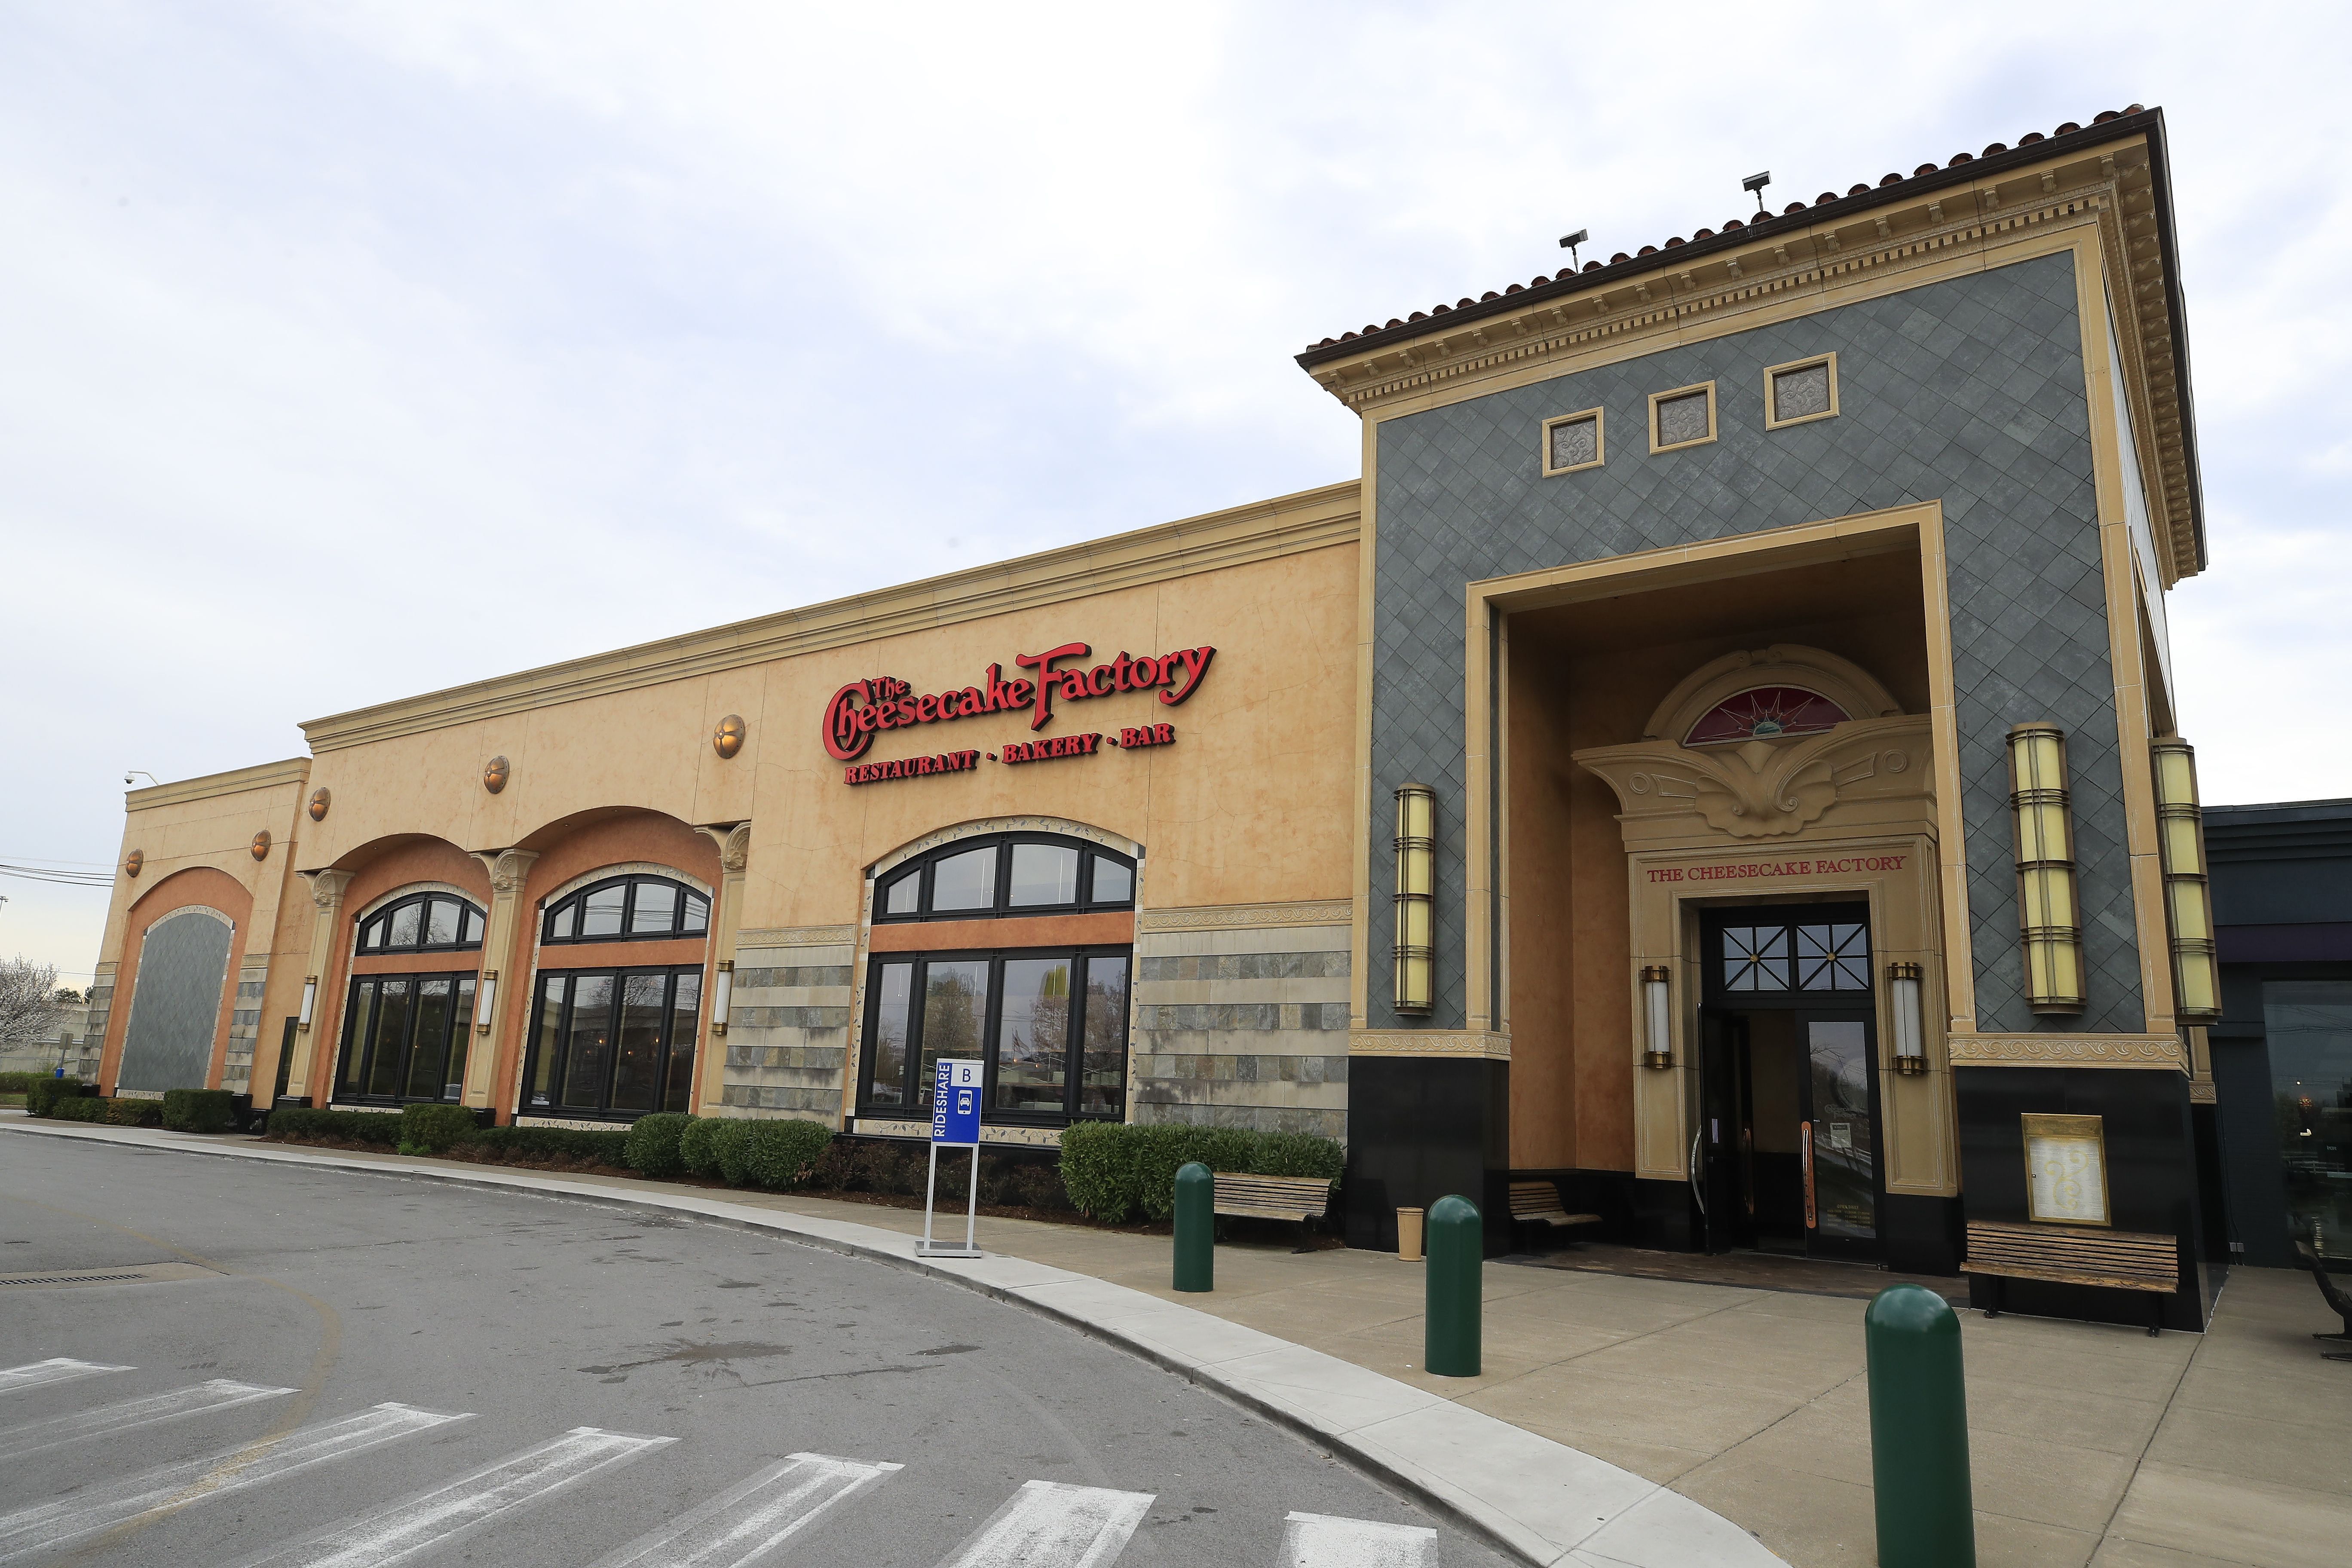 LOUISVILLE, KENTUCKY - MARCH 26: A Cheesecake Factory restaurant is operating on March 26, 2020 in Louisville, Kentucky. The restaurant chain has announced that it will not be able to pay its rent starting to April 1 due to how the COVID-19 crisis has affected its business. (Photo by Andy Lyons/Getty Images)